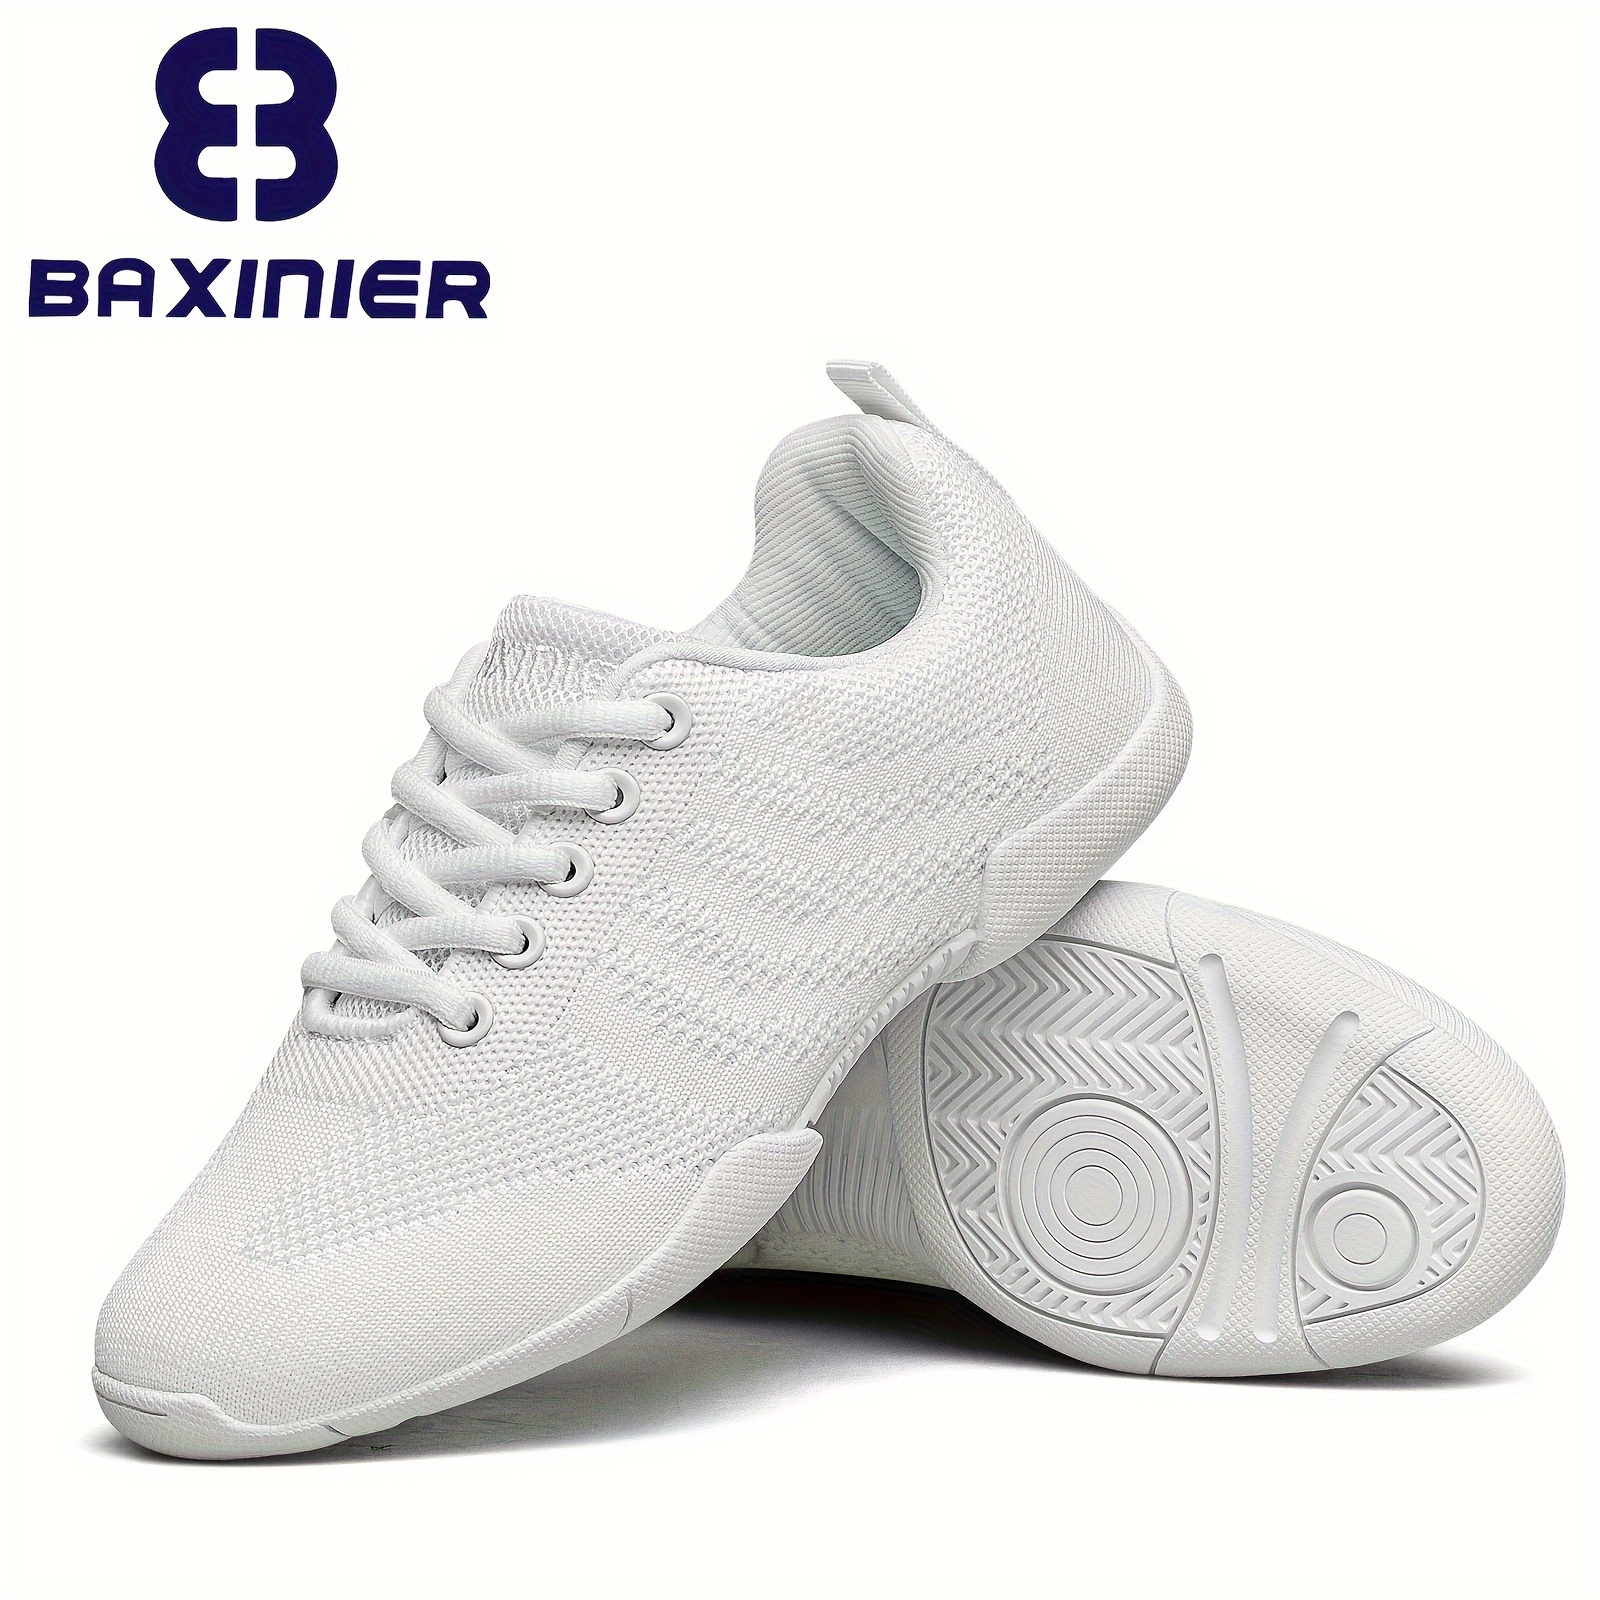 

Women Pure White Cheerleading Dancing Sneakers Girls Light Breathable Competition Training Shoes Gymnastics Shoes Comfortable Casual Sneakers